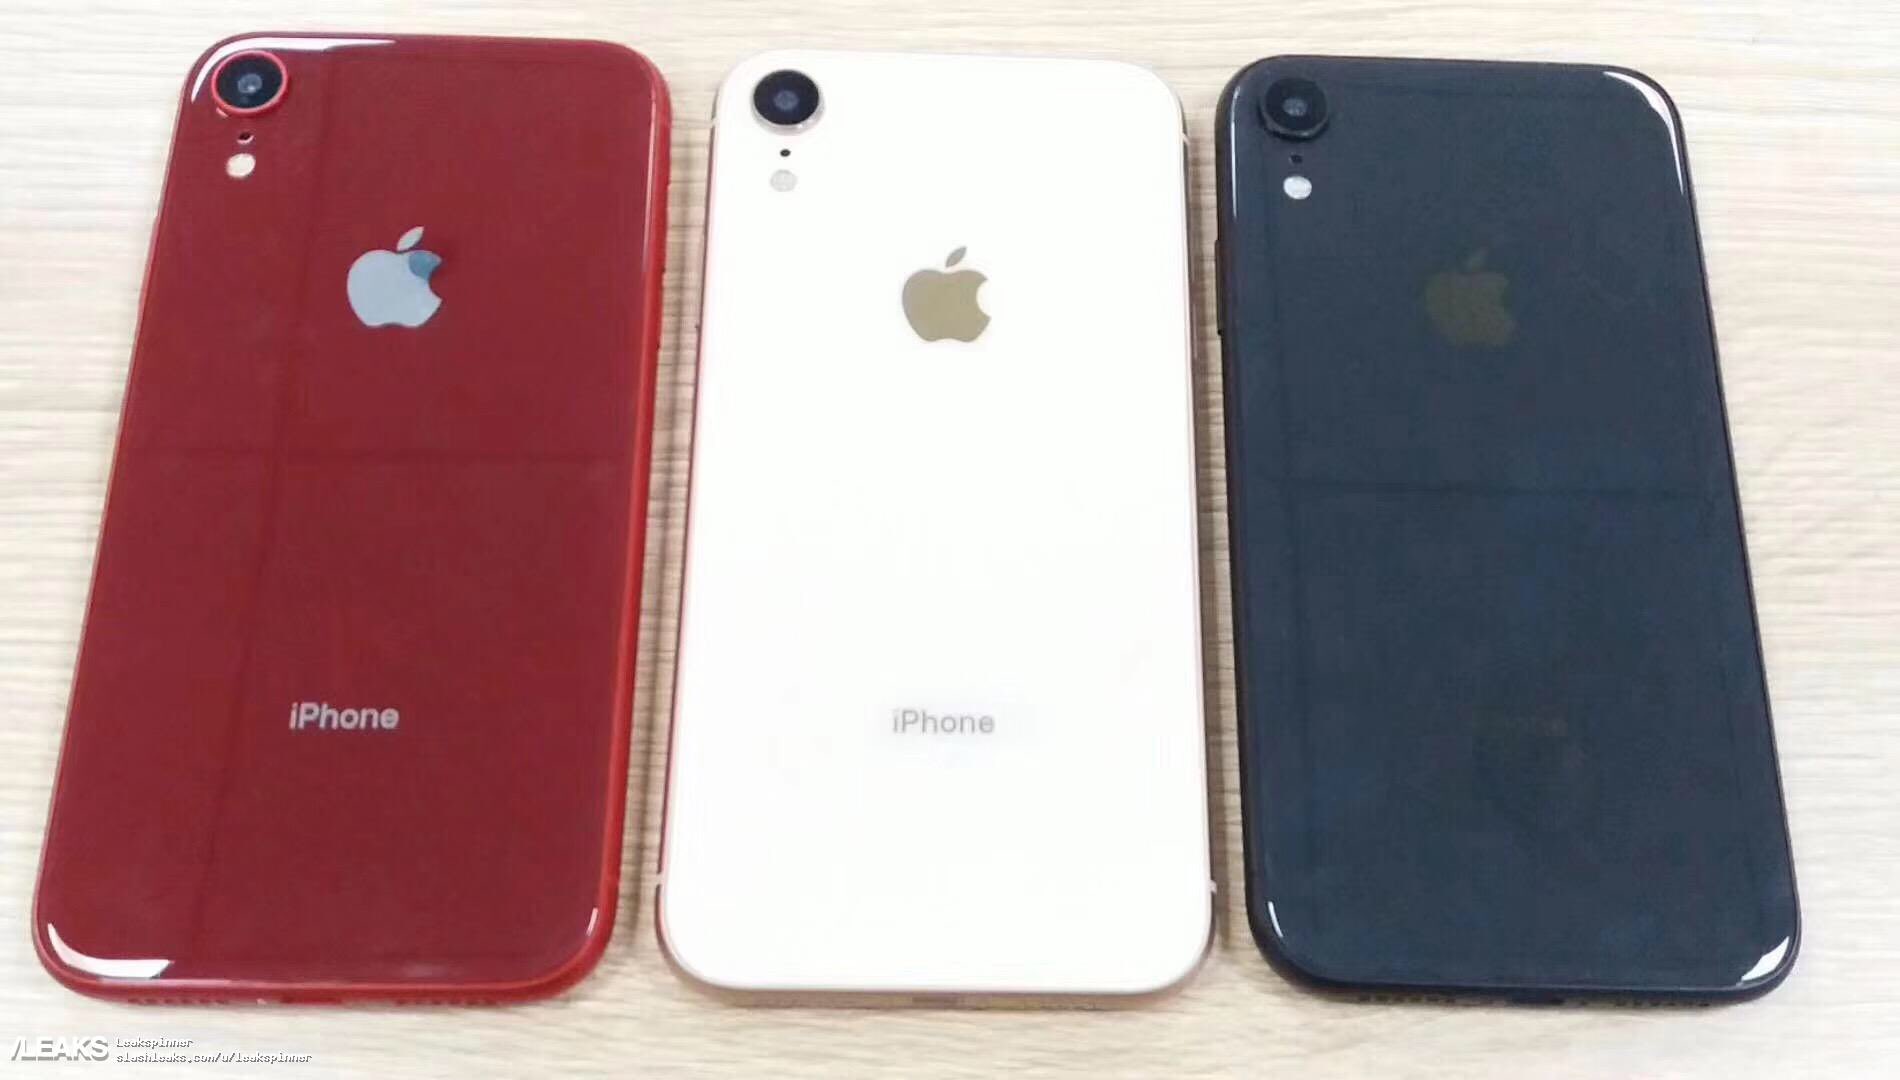 New 6.1 ″ model could be called “iPhone Xc”